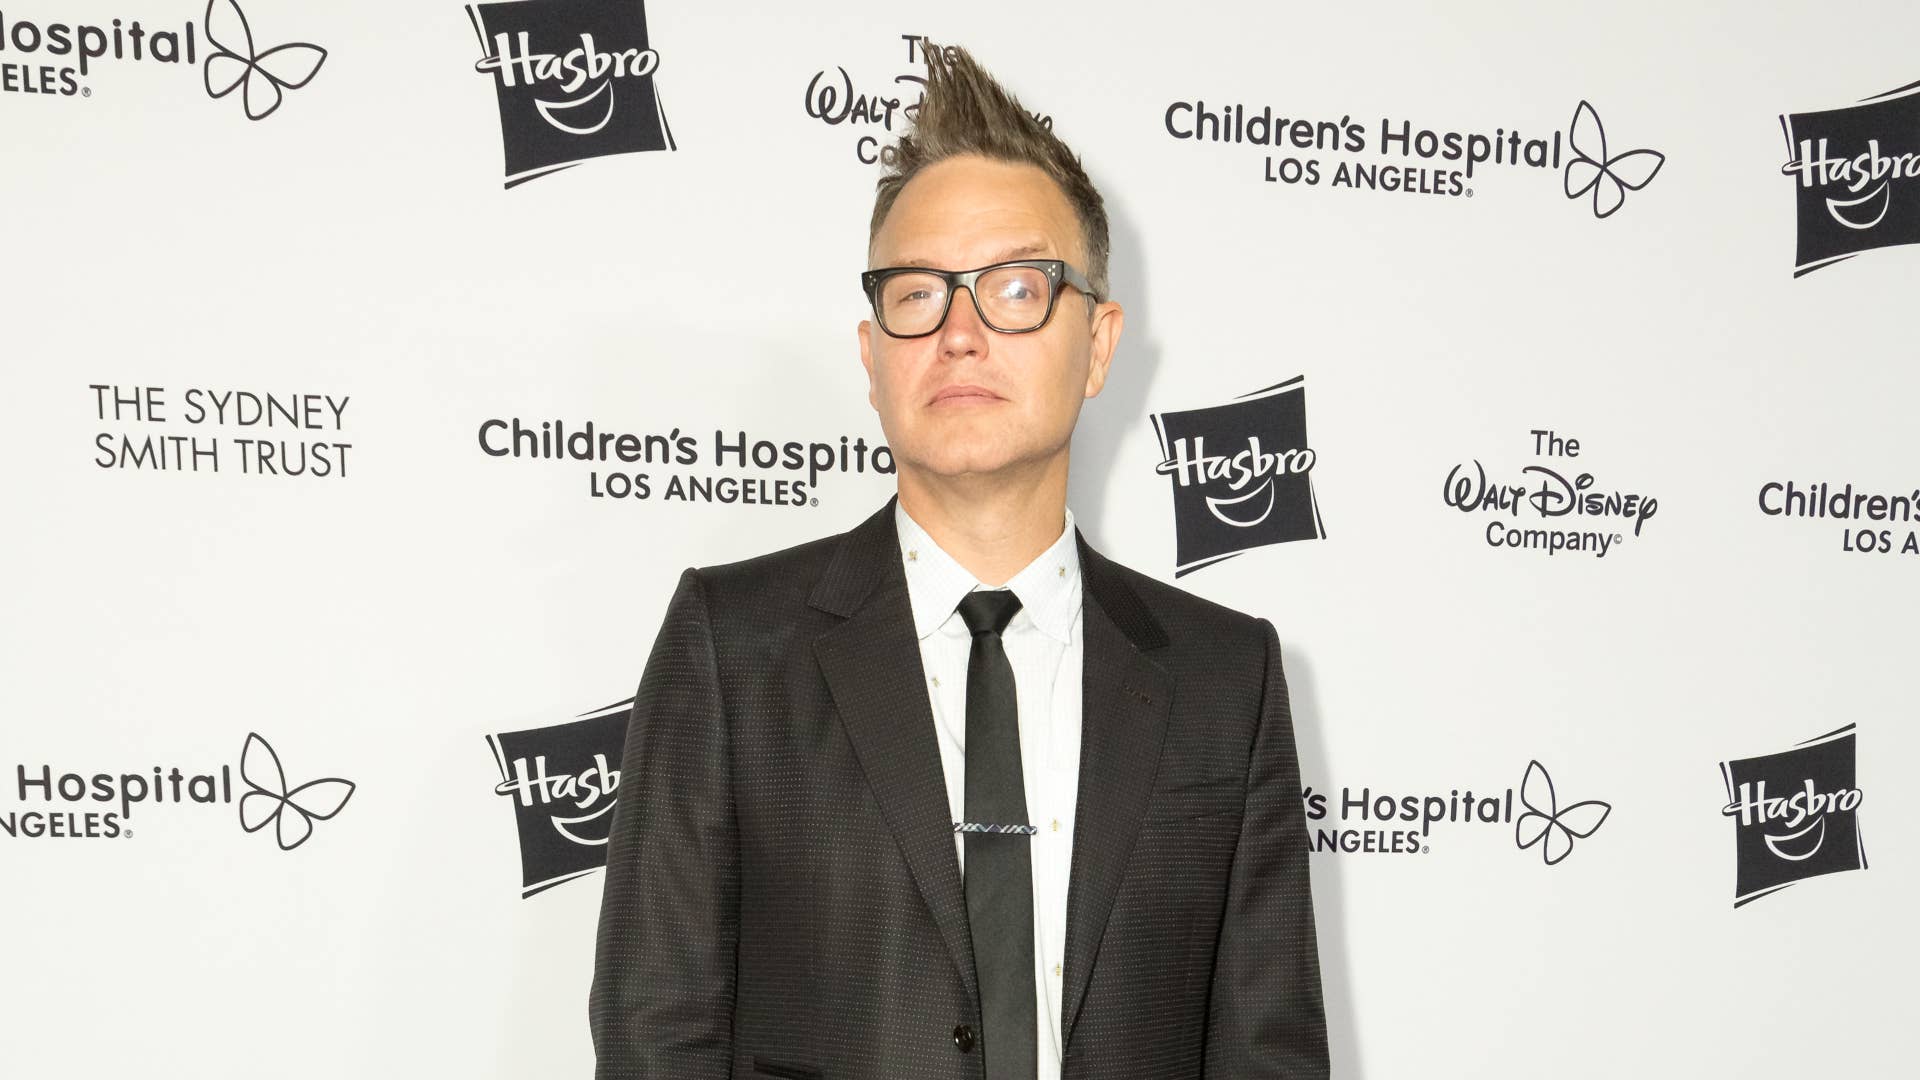 Mark Hoppus attends 2018 From Paris With Love Children's Hospital Los Angeles Gala.